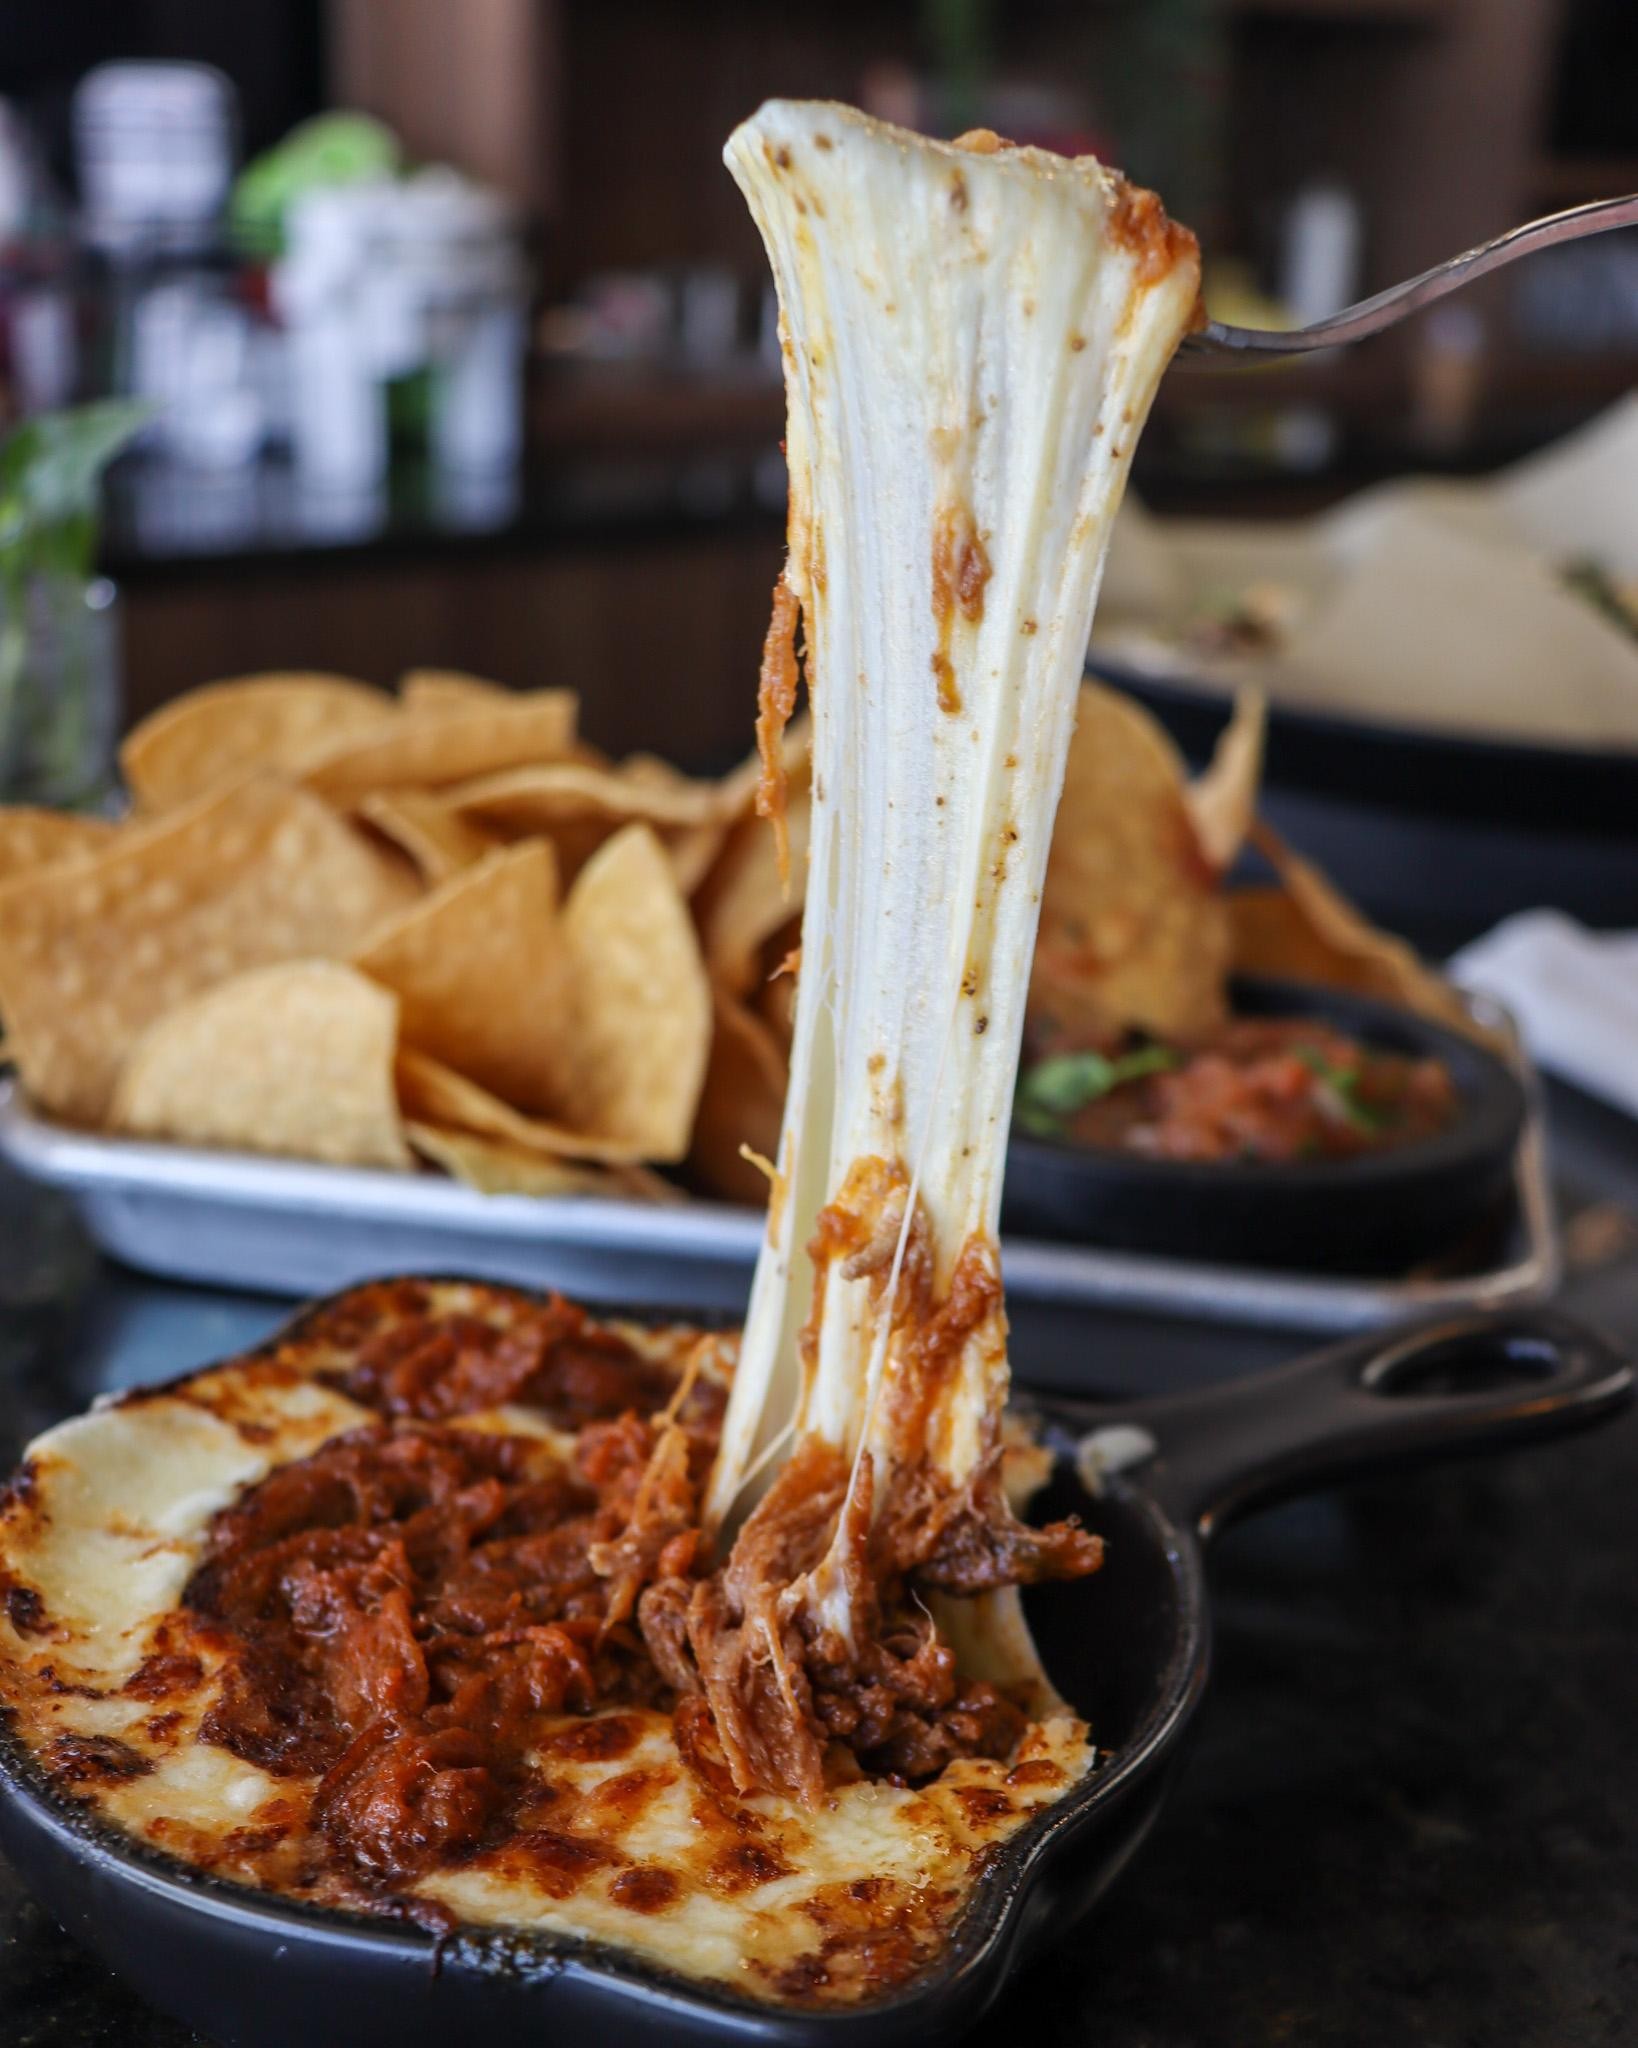 Chips and Queso Fundido